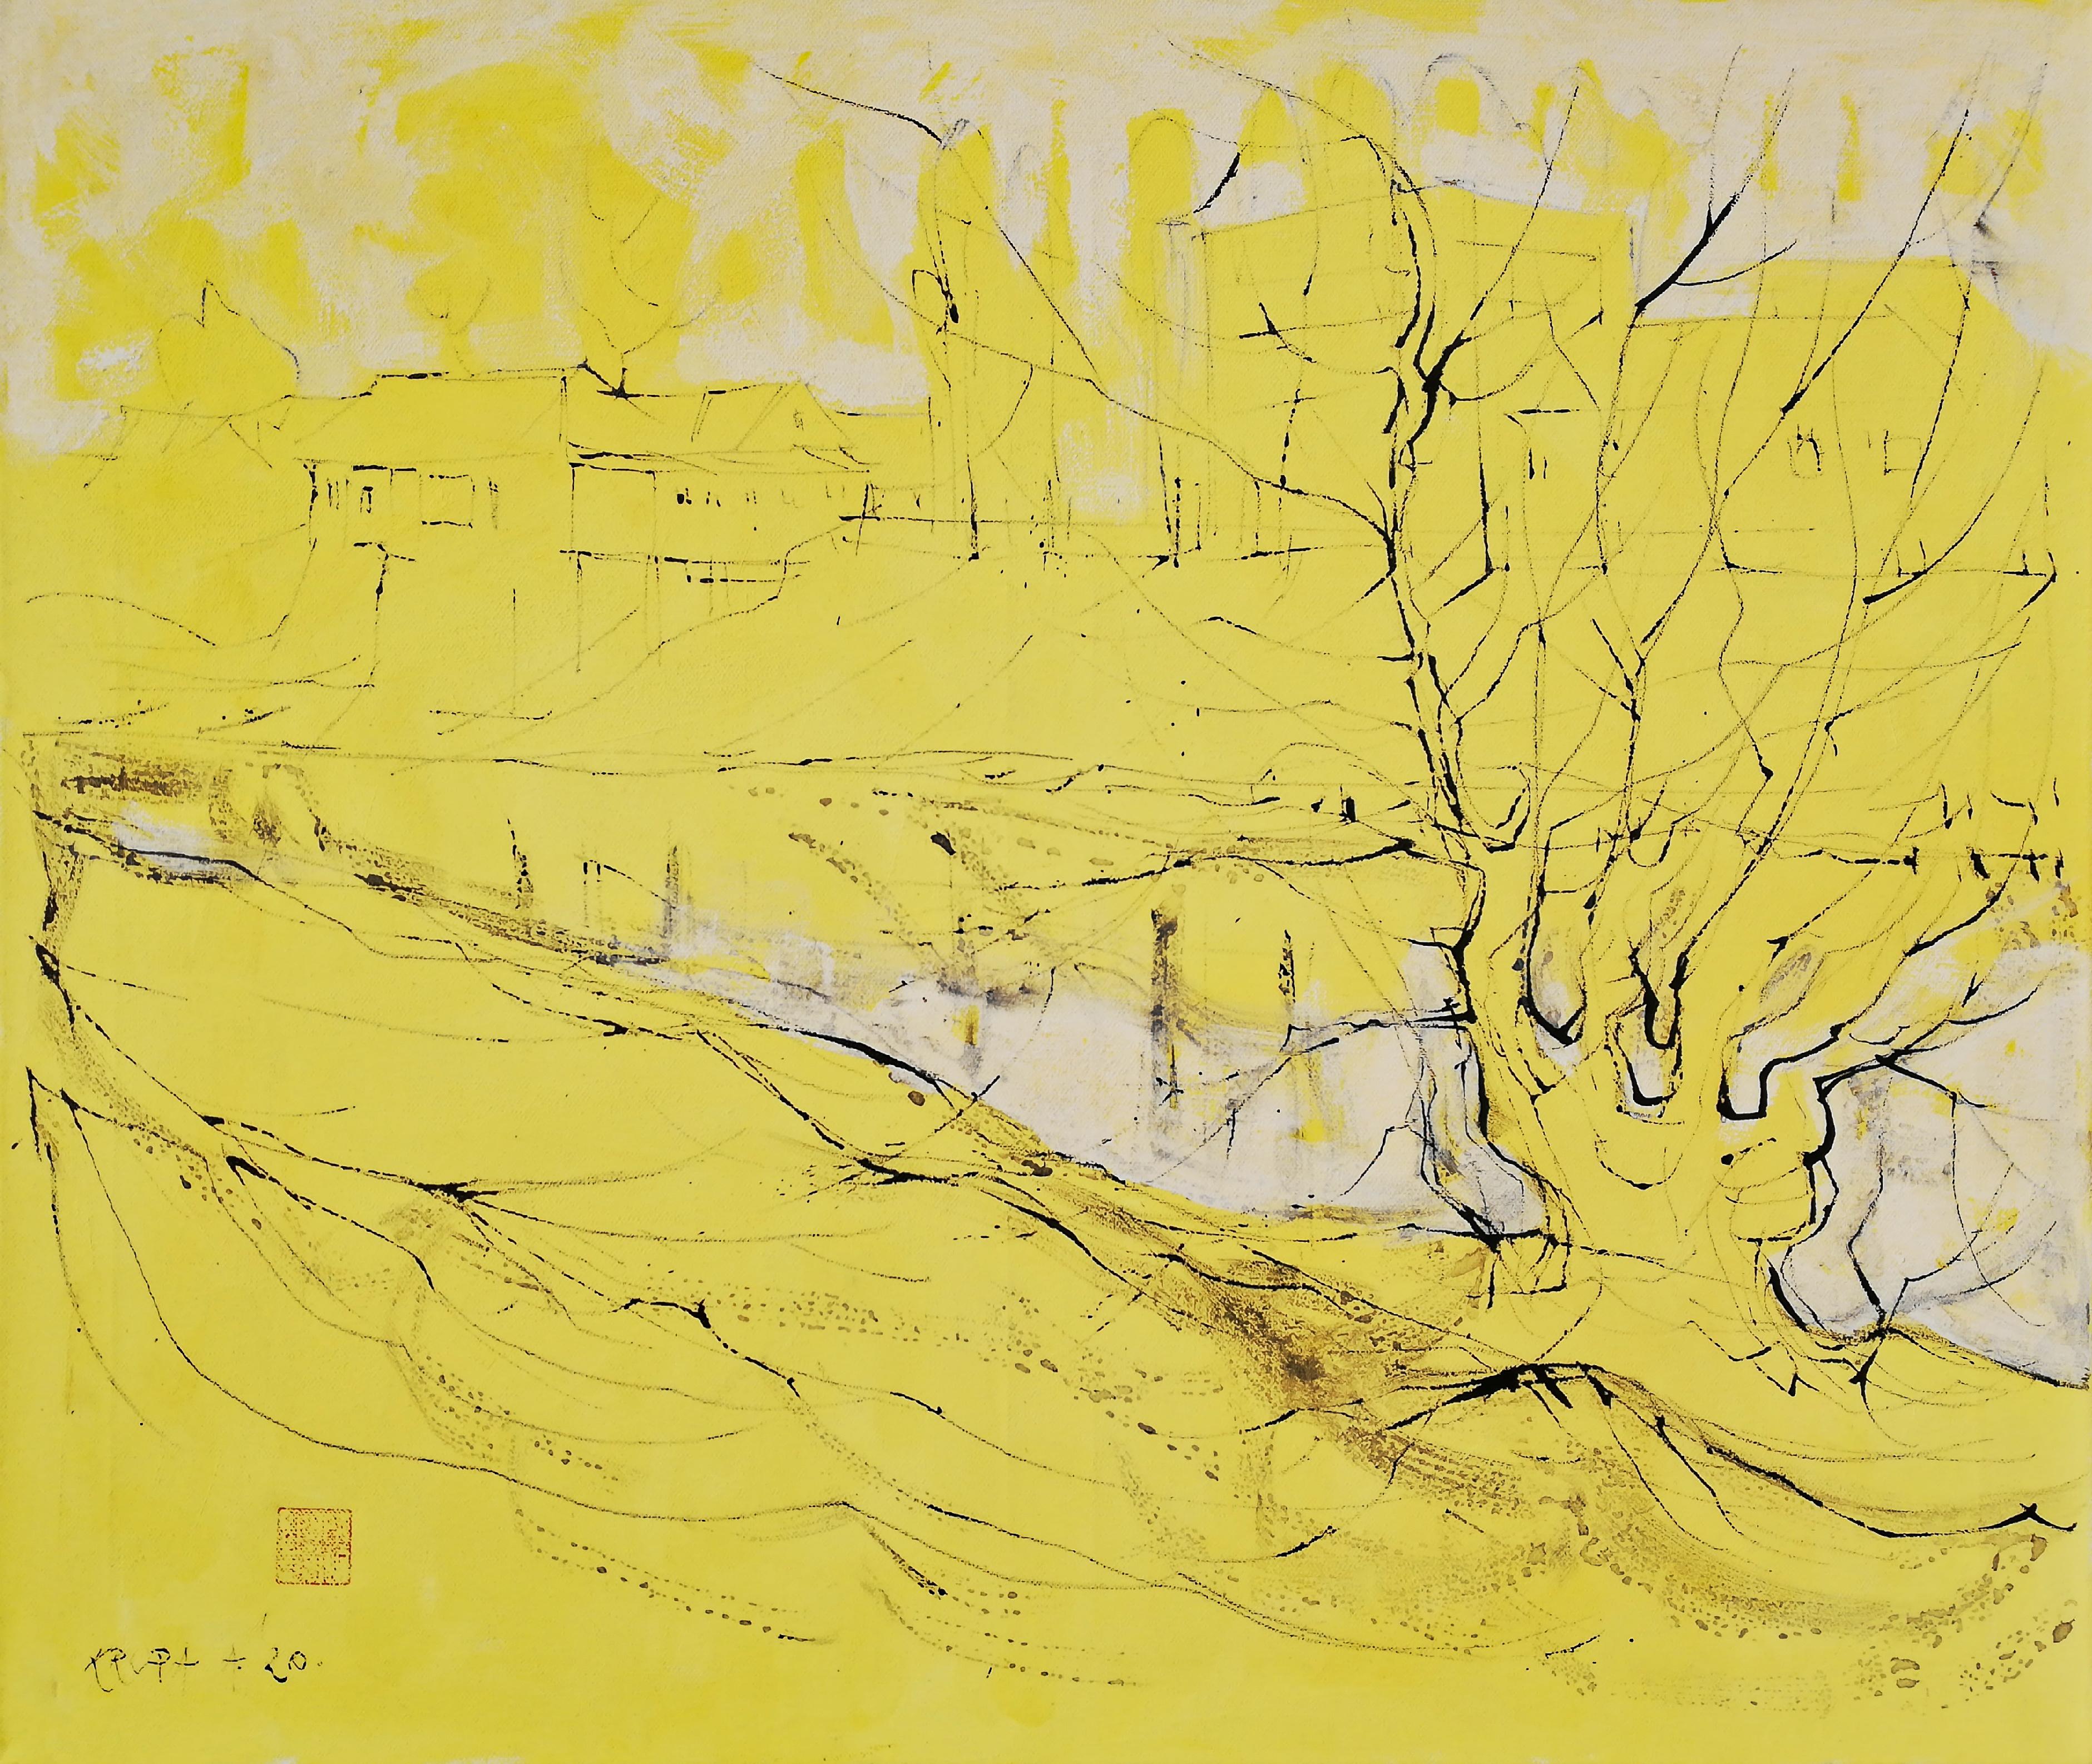 Alfred Freddy Krupa Abstract Painting - It's a New Day, Modern Abstract Ink Art Oil Ink Painting Canvas Landscape Yellow